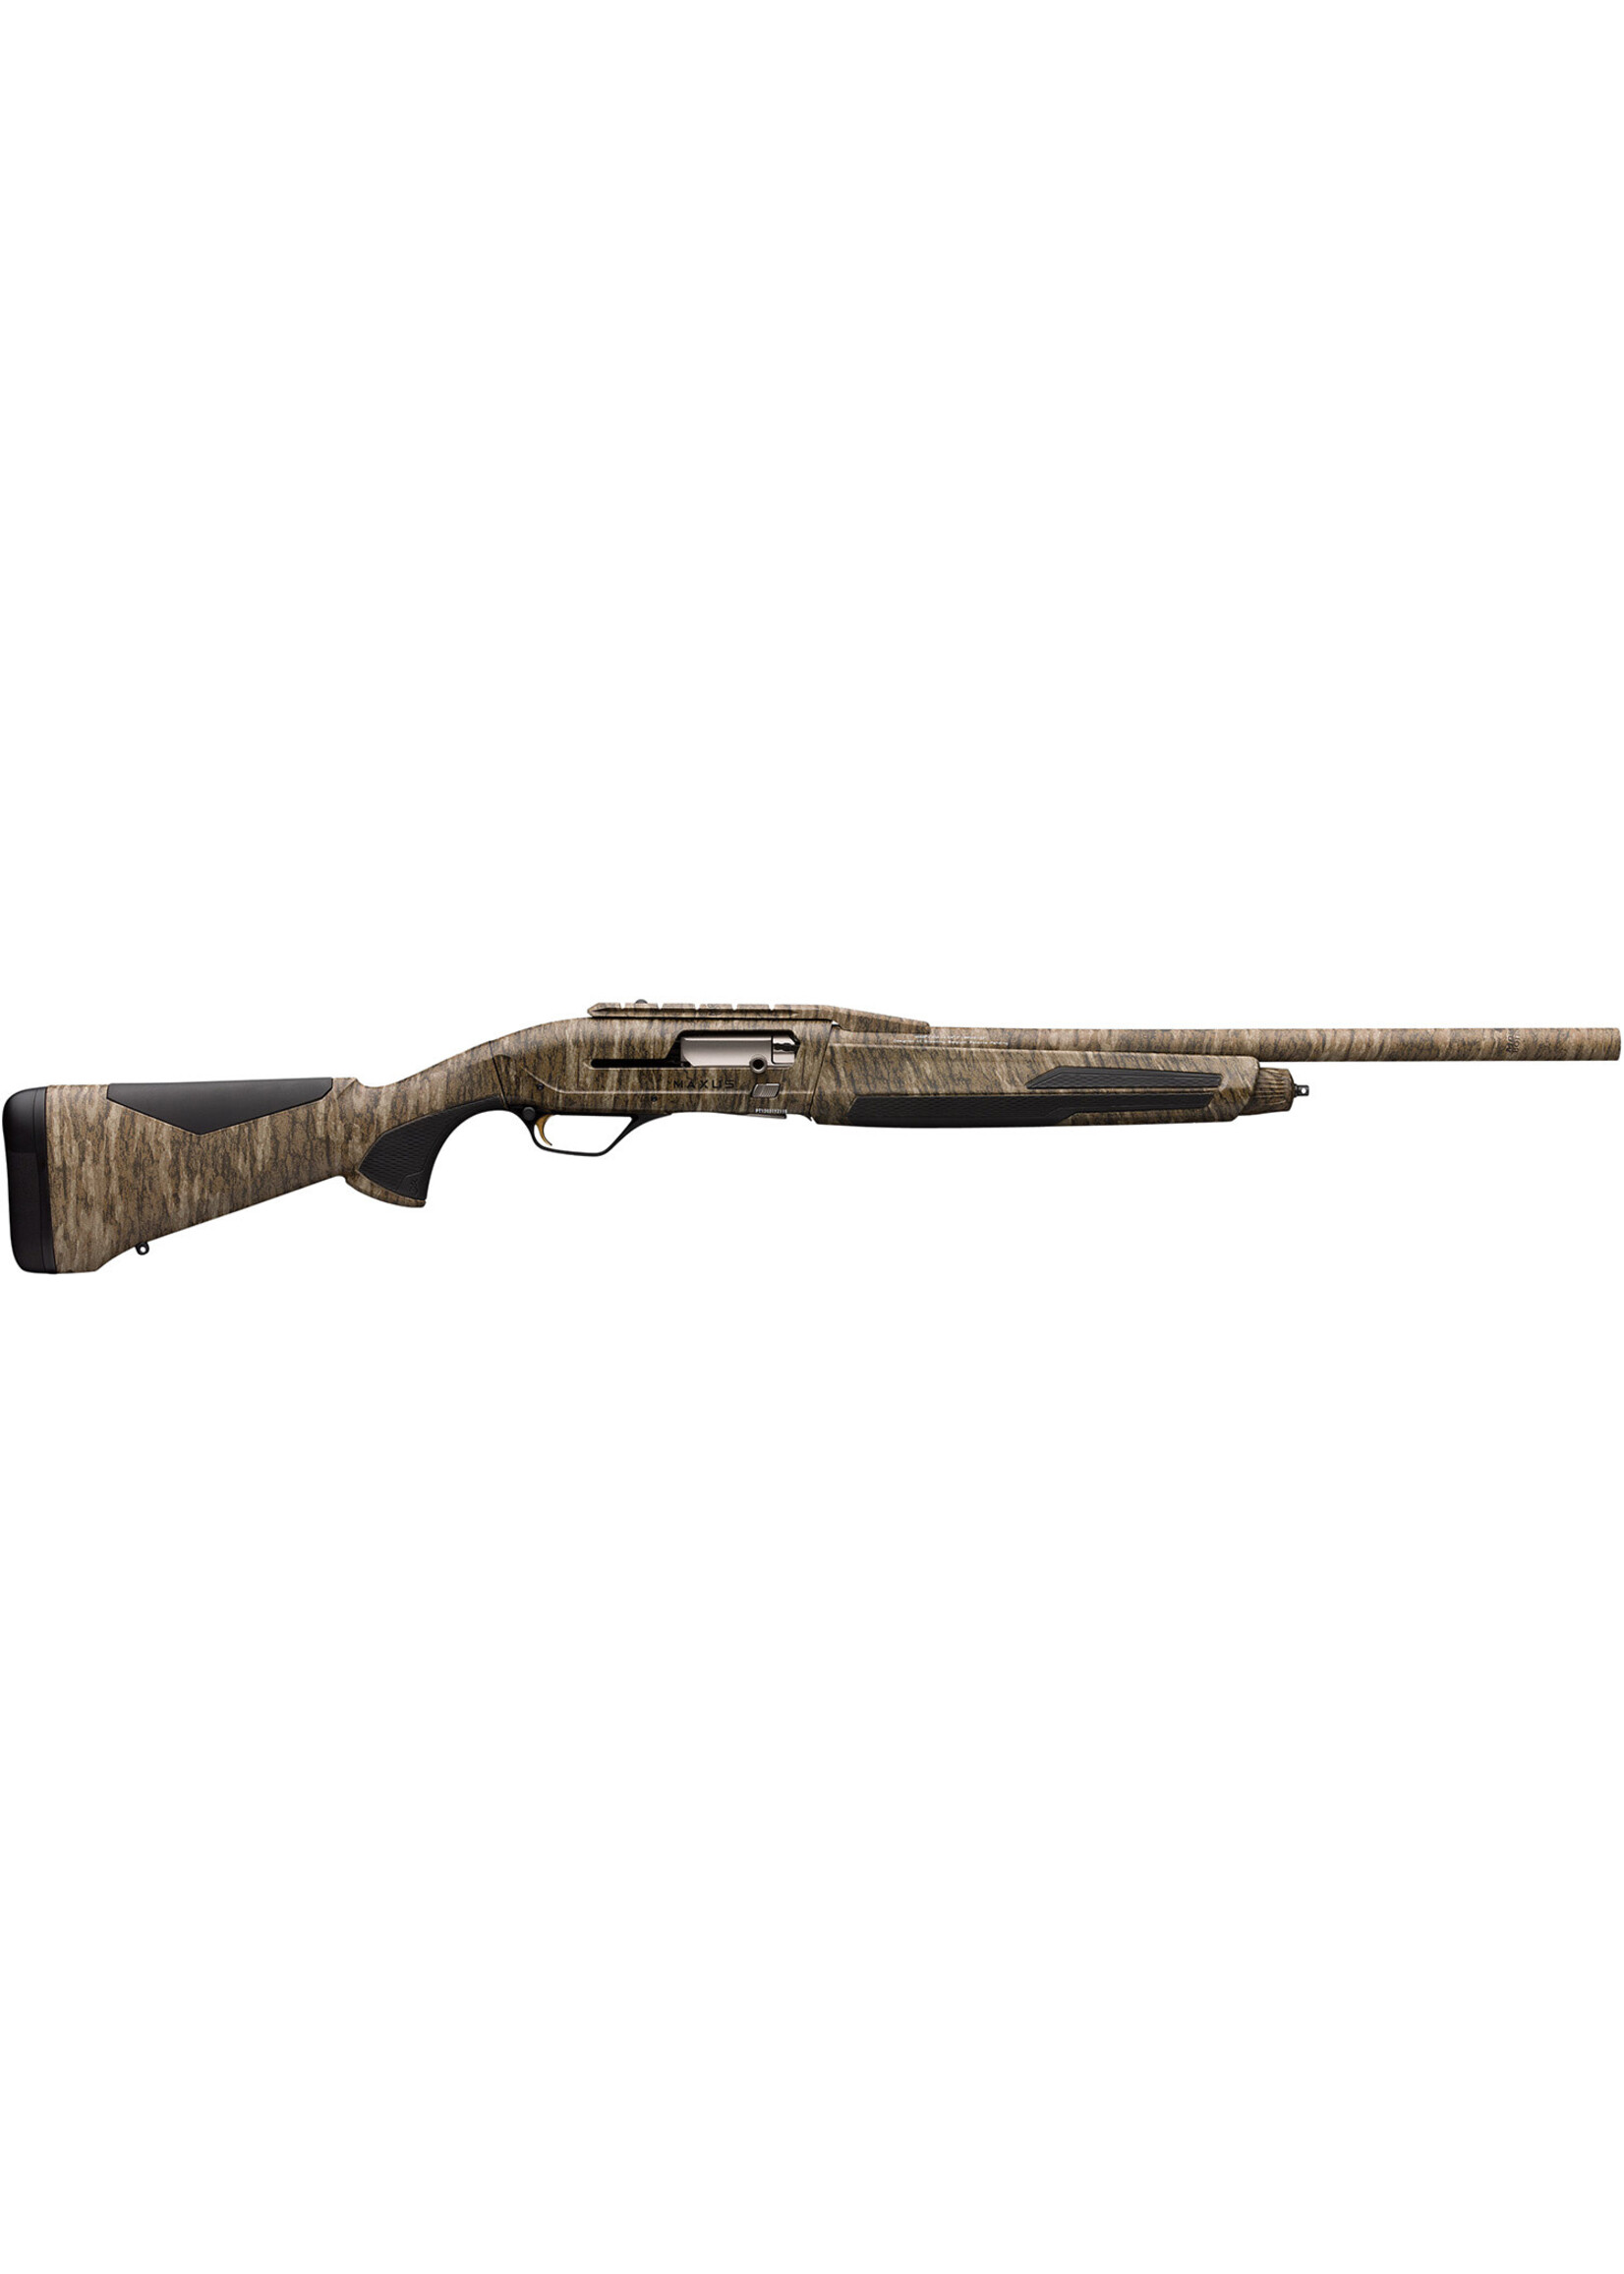 Browning SPECIAL ORDER Browning 011745321 Maxus II Rifled Deer 12 Gauge 3" 4+1 22" Fully Rifled Barrel, Mossy Oak Bottomland, Synthetic Furniture with Overmolded Grip Panels, Weaver Style Scope Mount